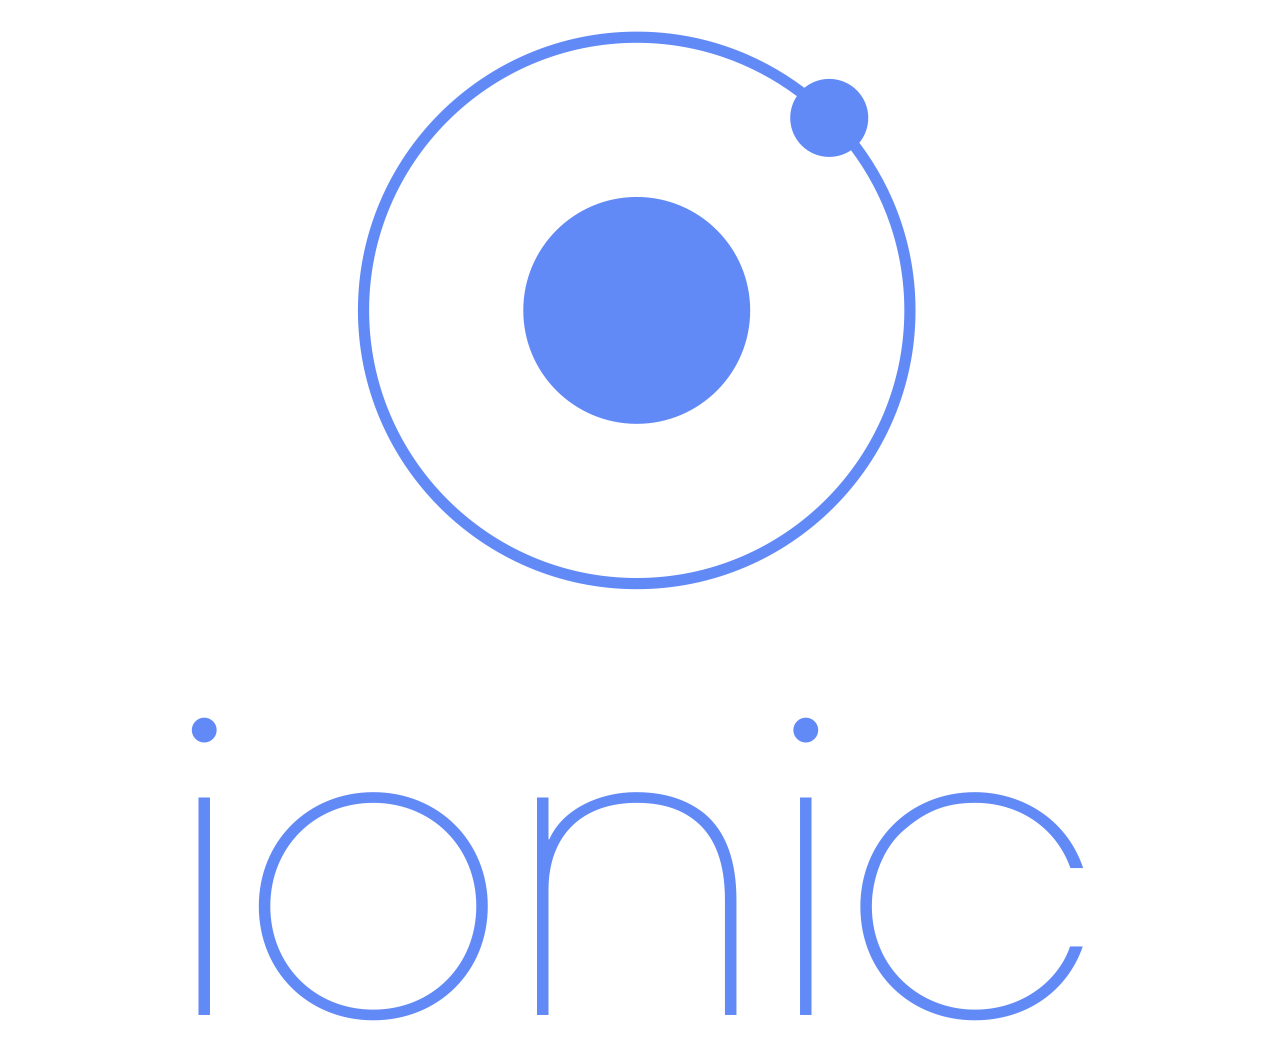 [HELP] How to format this list in ionic, based on example? - ionic-v3 - Ionic Forum